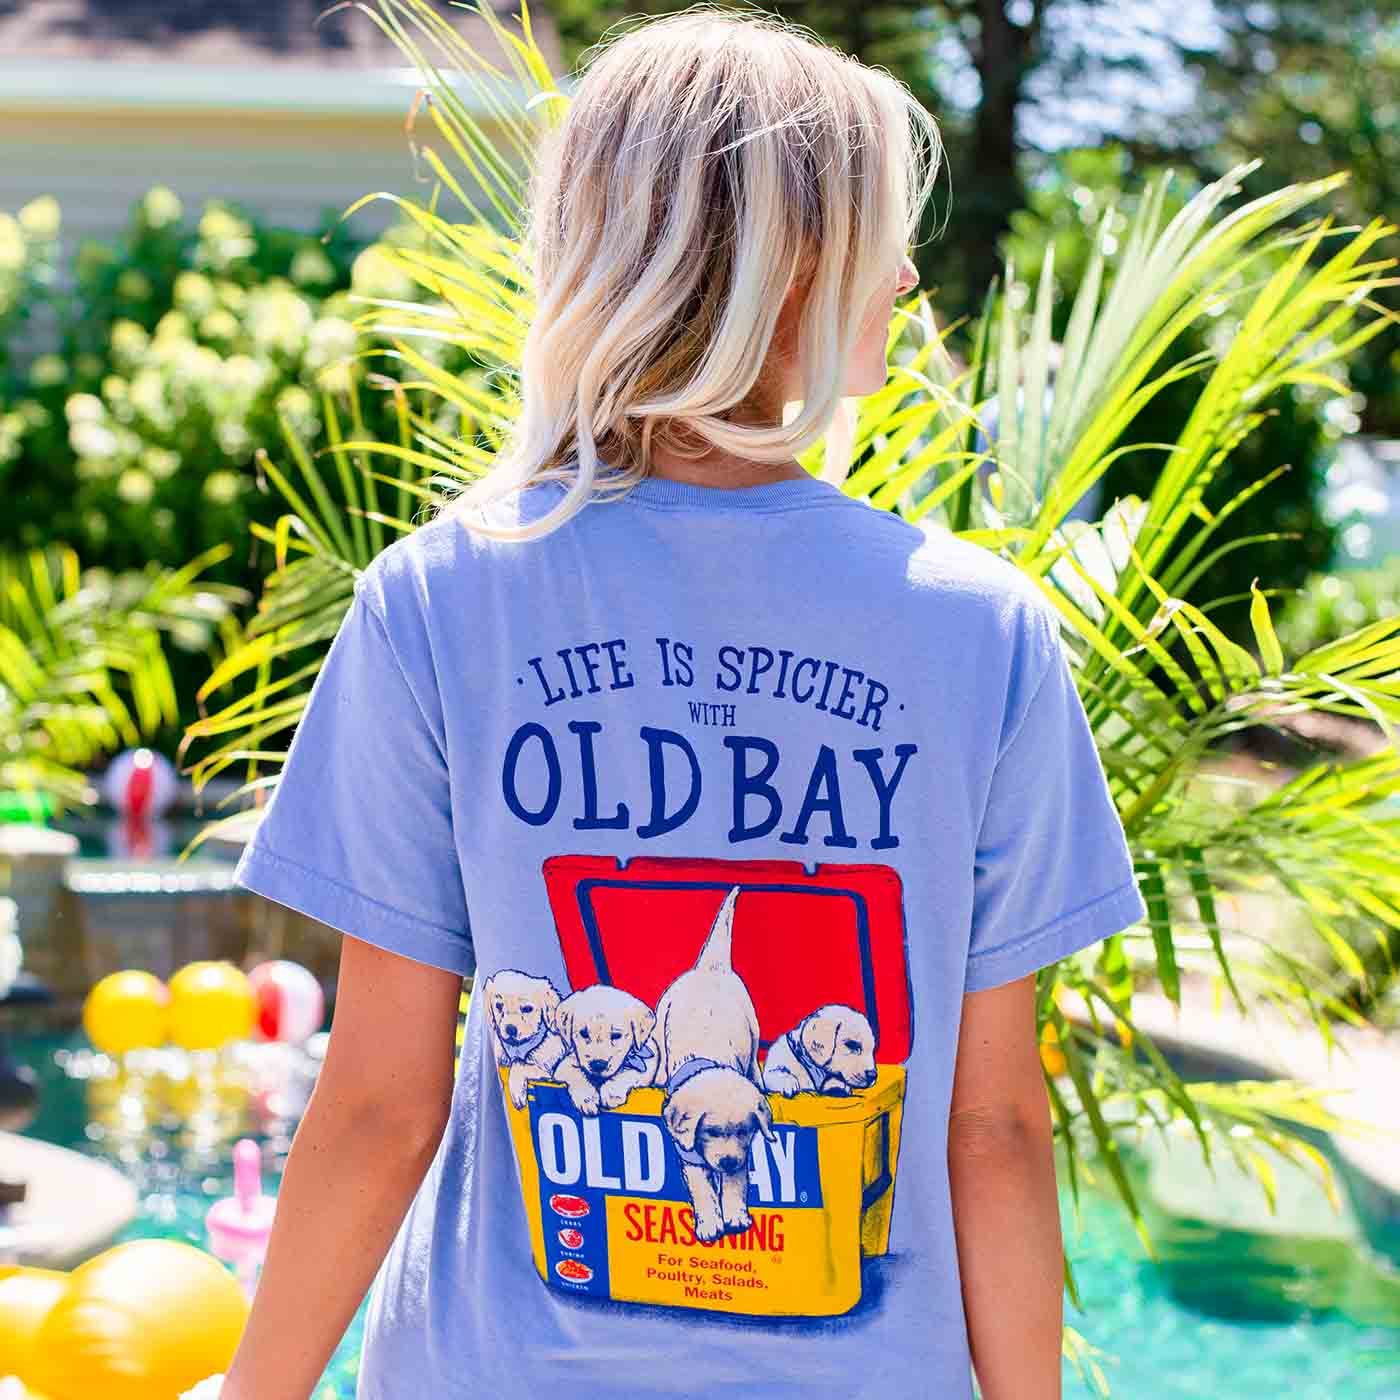 Old Bay Cooler with Puppies (Washed Denim) / Shirt - Route One Apparel